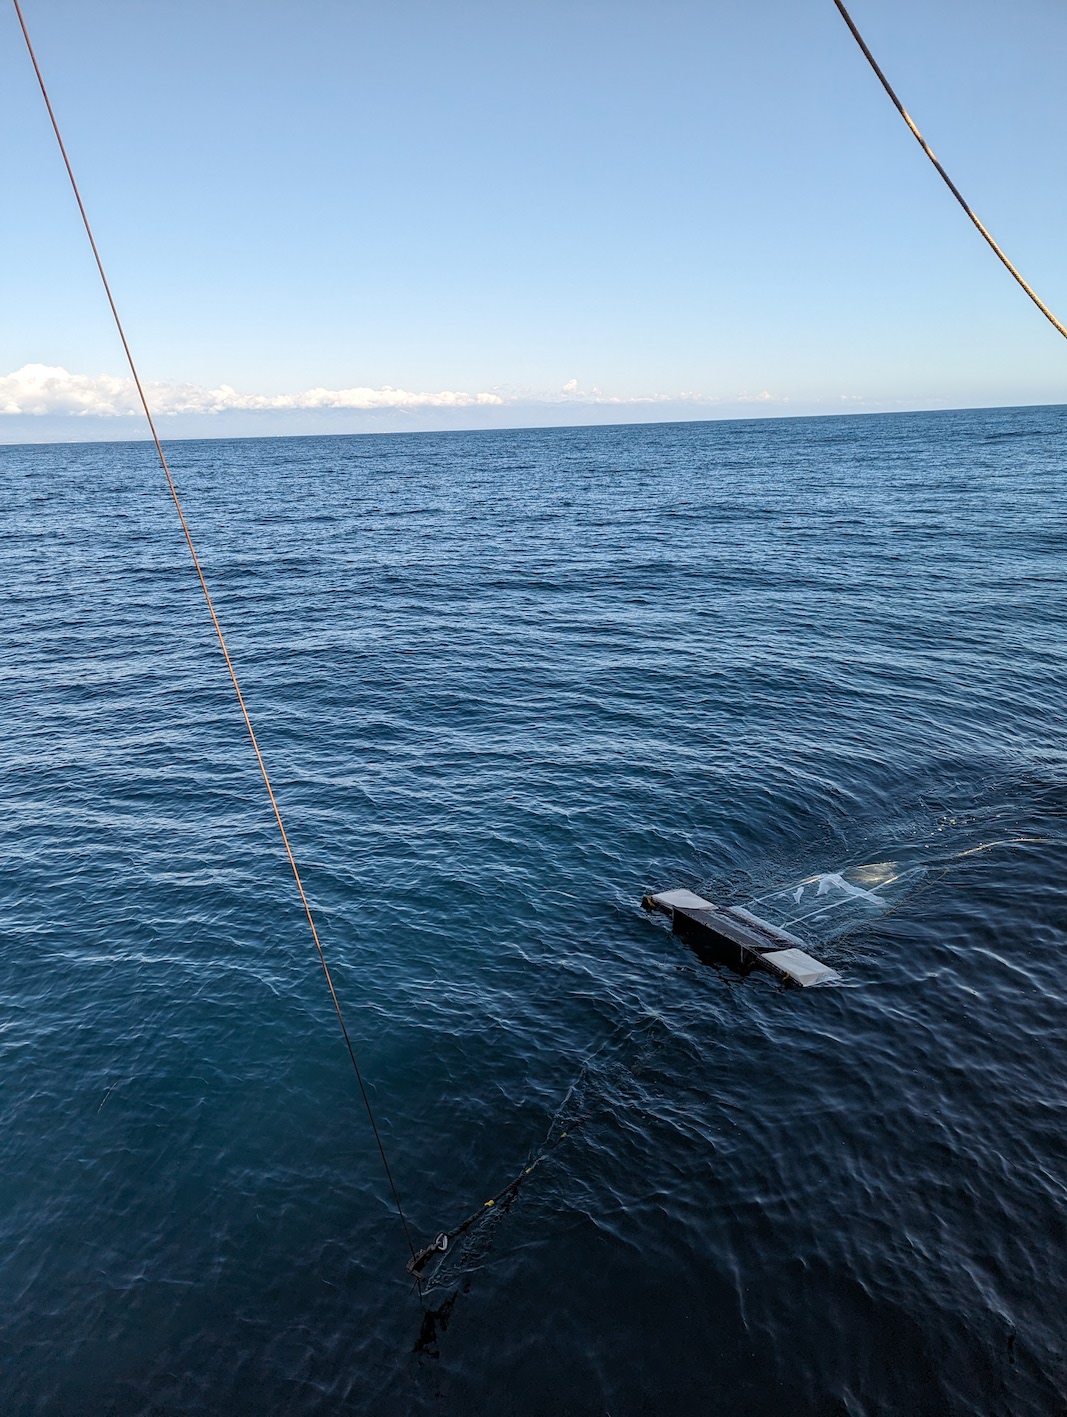 manta zooplankton net being towed through the ocean